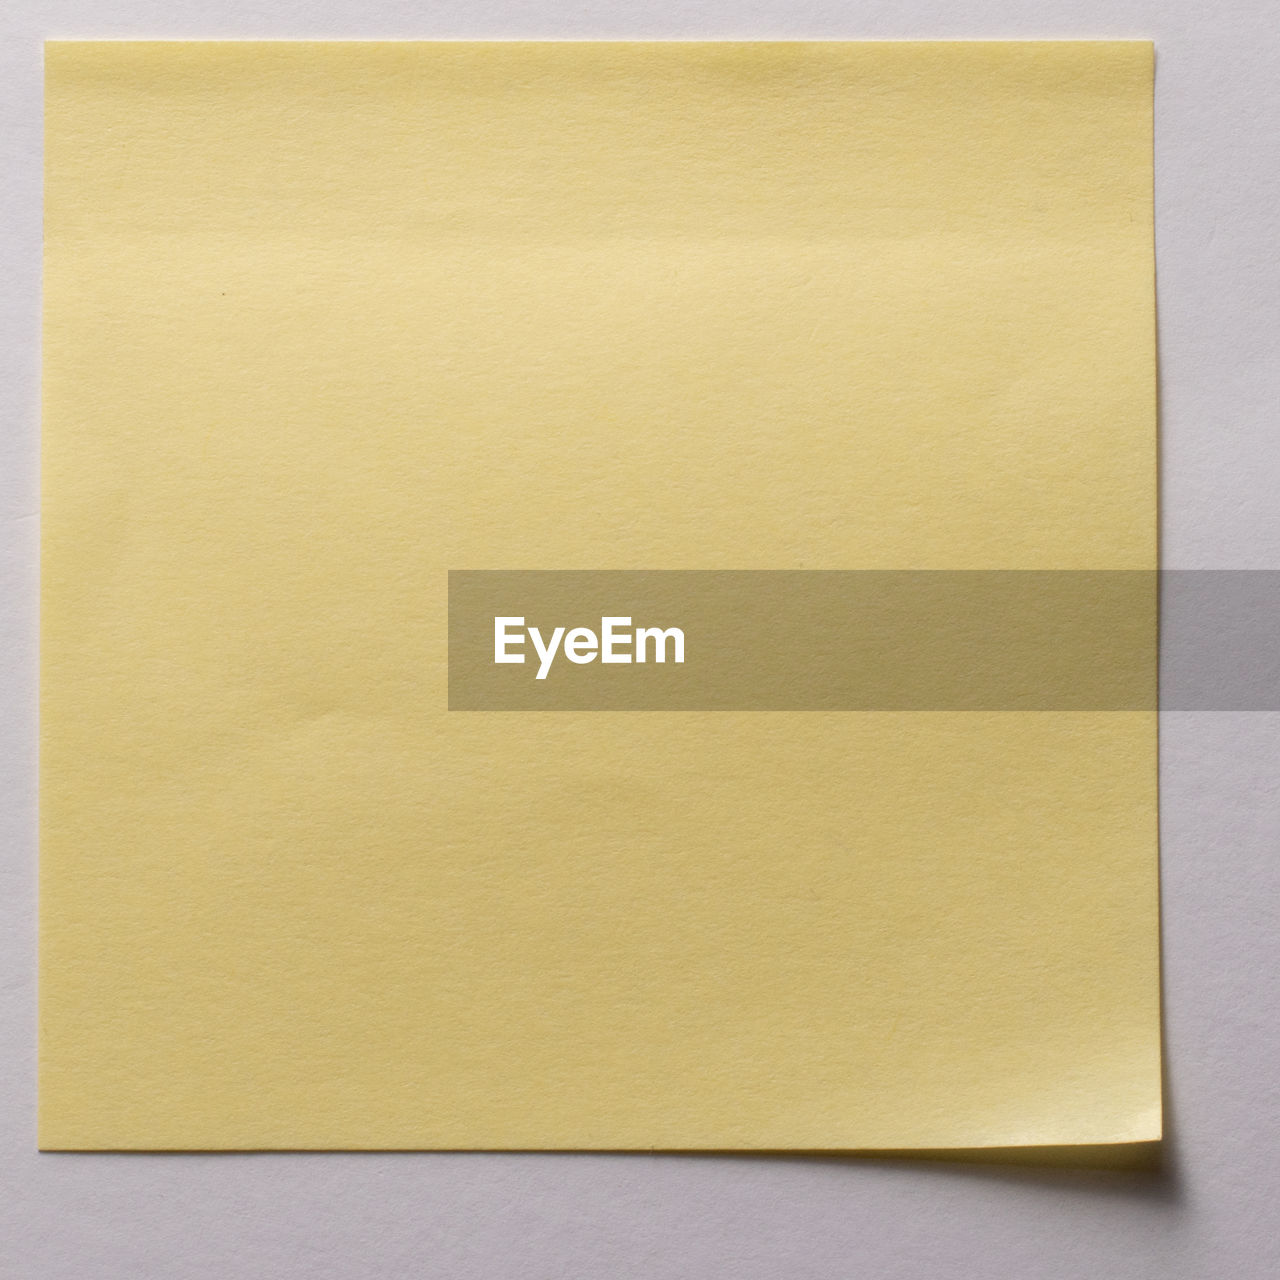 CLOSE-UP OF A YELLOW PAPER